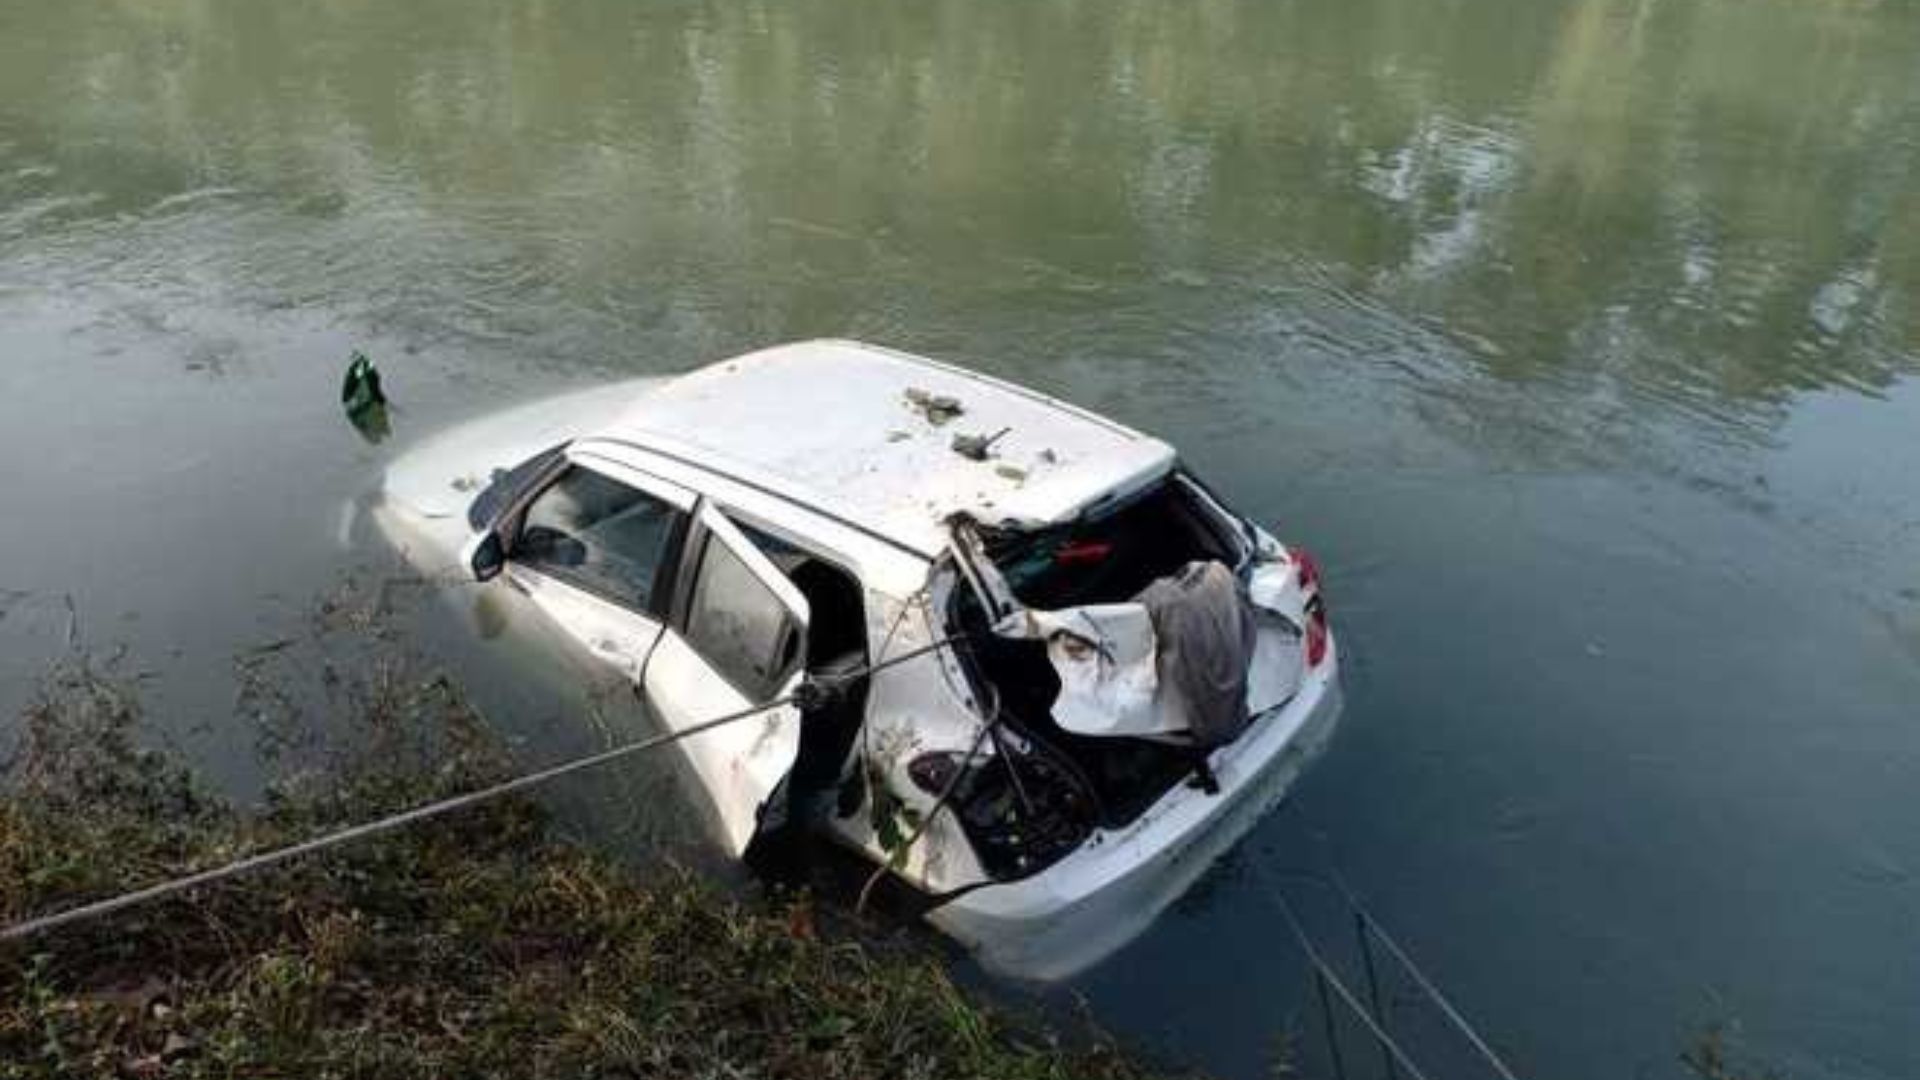 Karnataka: Teen loses life after his car plunged into a canal